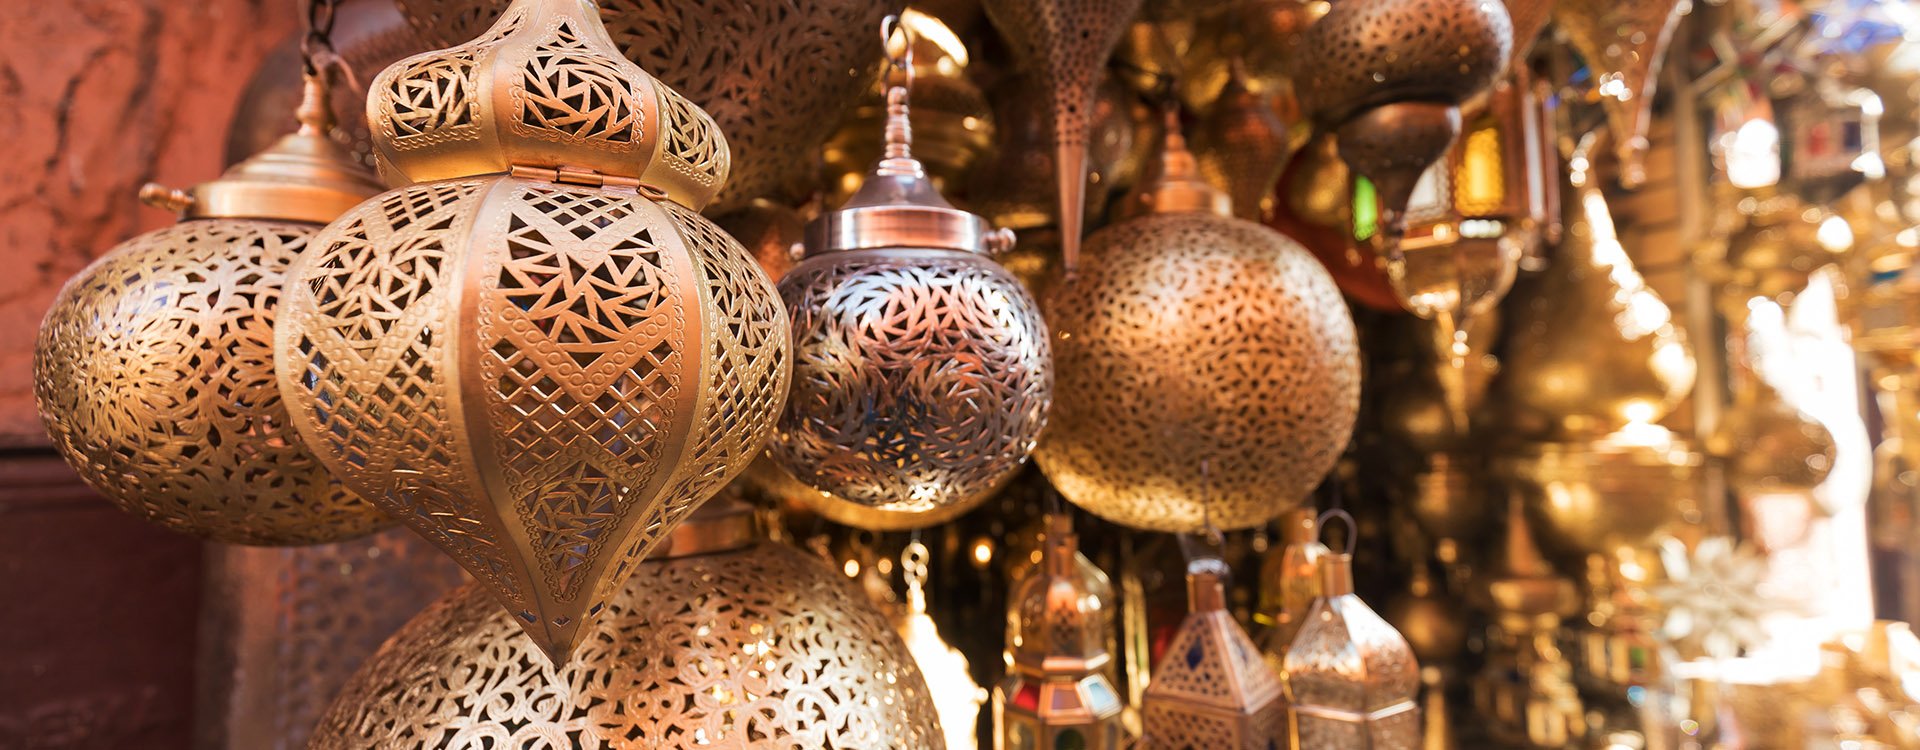 Moroccan style hanging lamps at the market in medina, Marrakech. Traditional moroccan market.